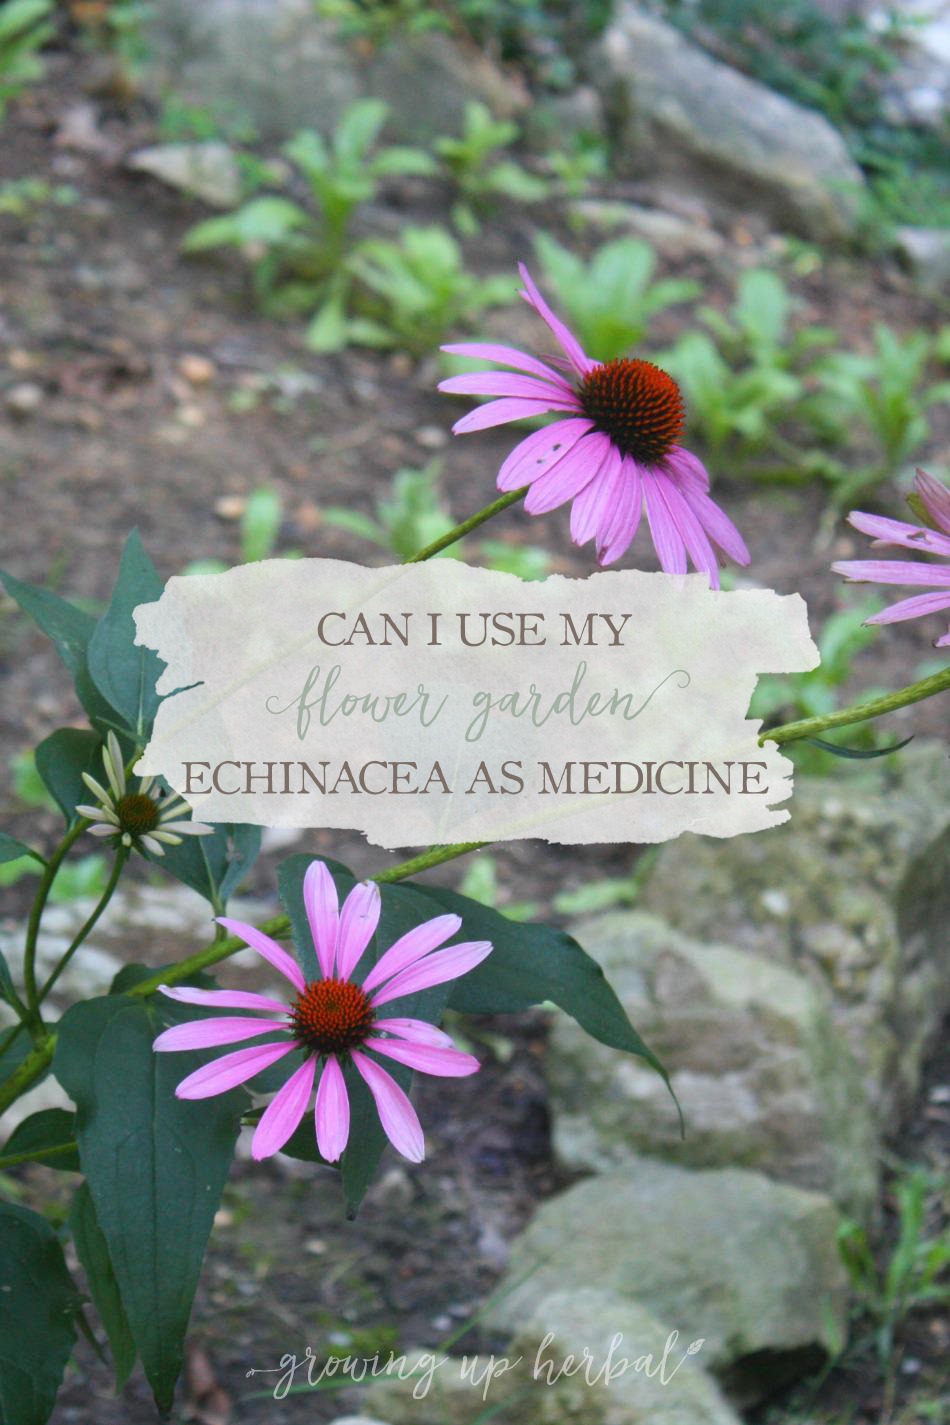 Can I Use My Flower Garden Echinacea For Medicine? | Growing Up Herbal | Ever wondered if the echinacea growing in your flower garden can be used medicinally?